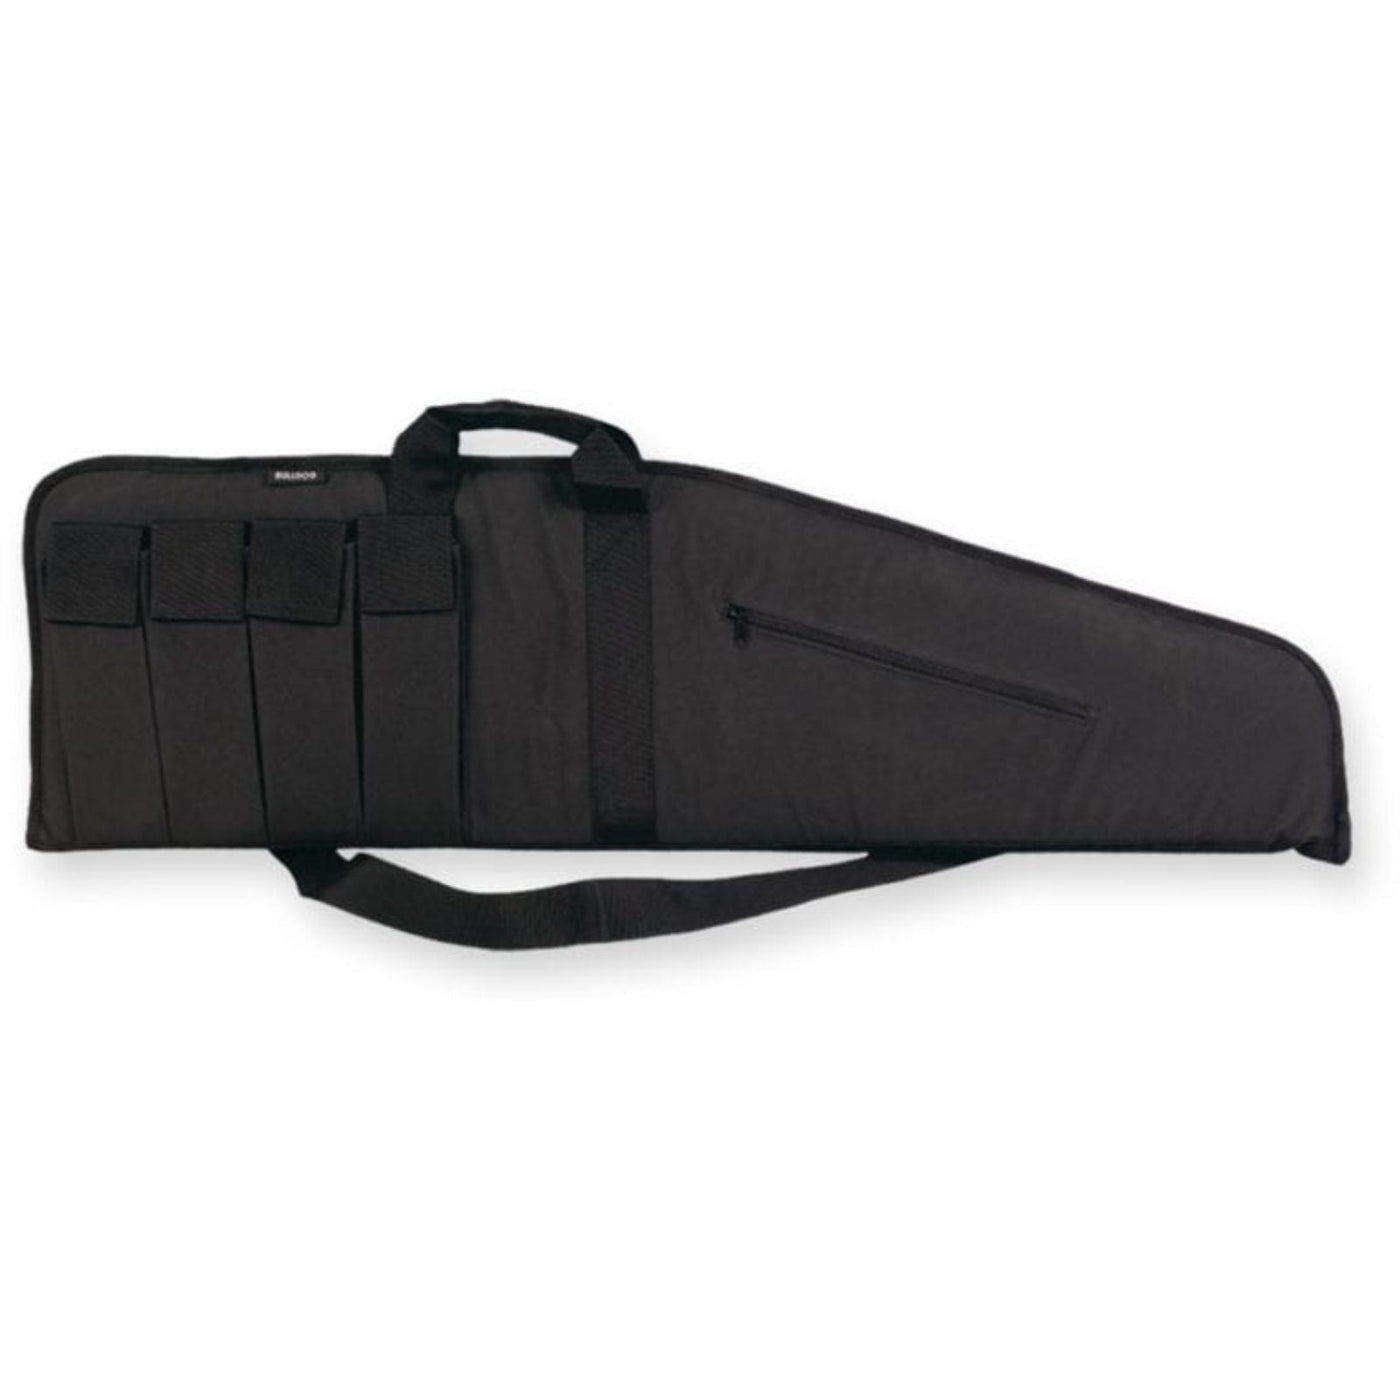 Bulldog Cases Bulldog Extreme Tactical Rifle Case In 40 In Shooting